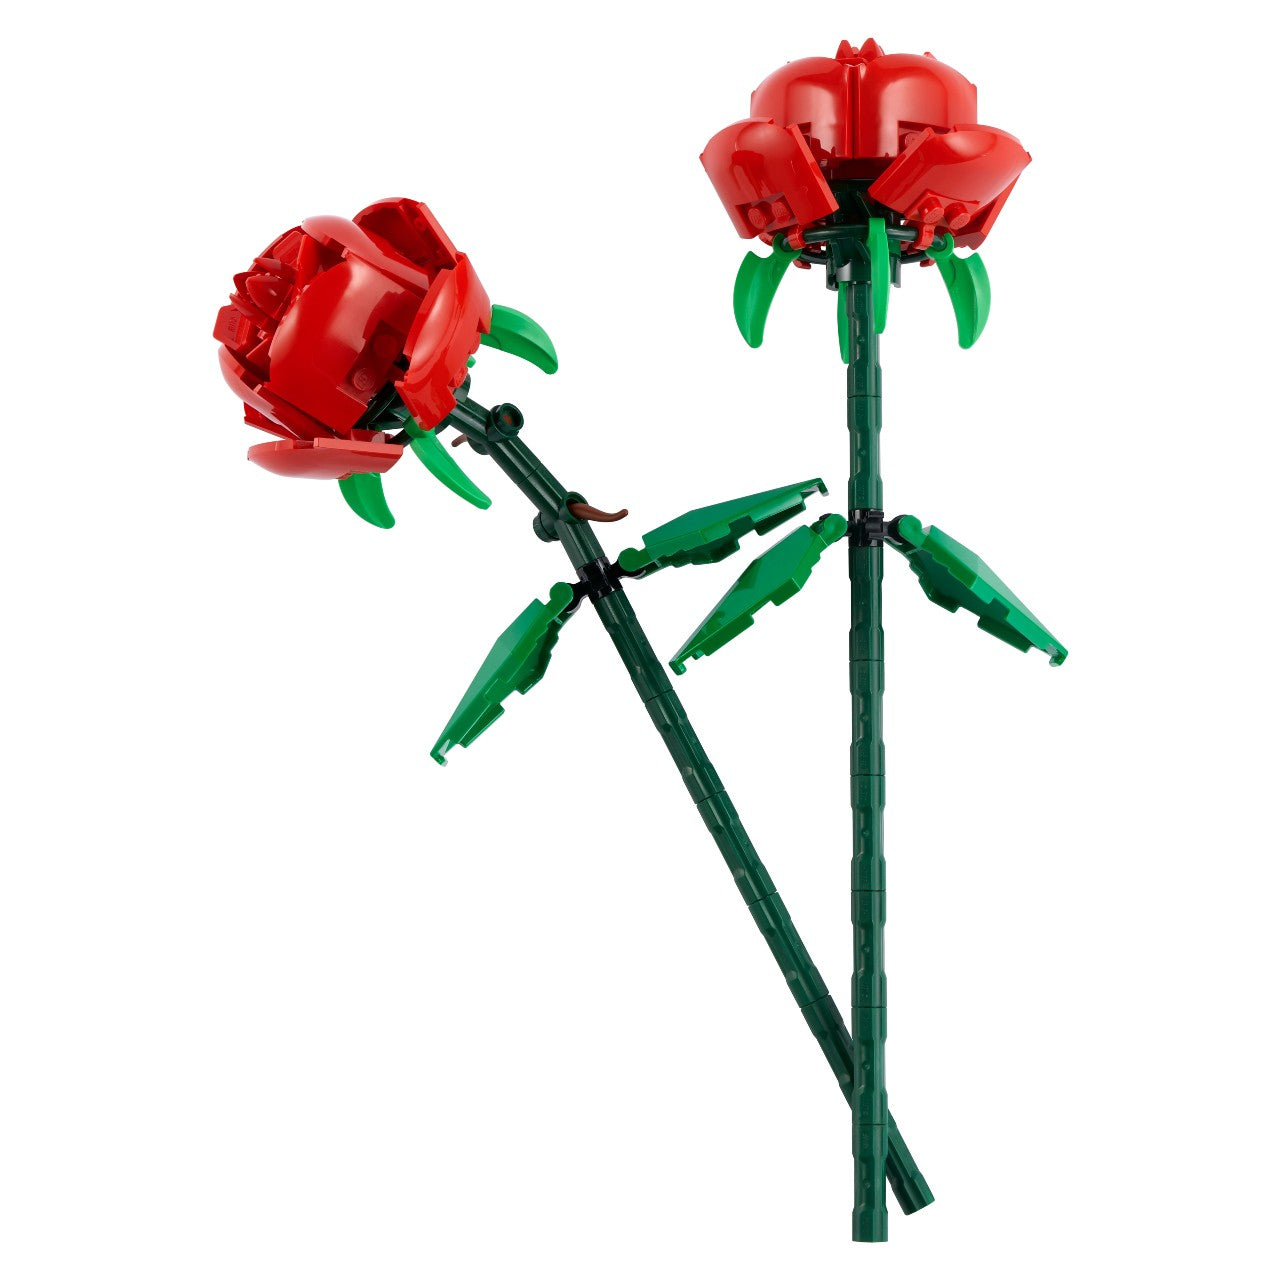 Two red roses with leaves and stem built from Lego.